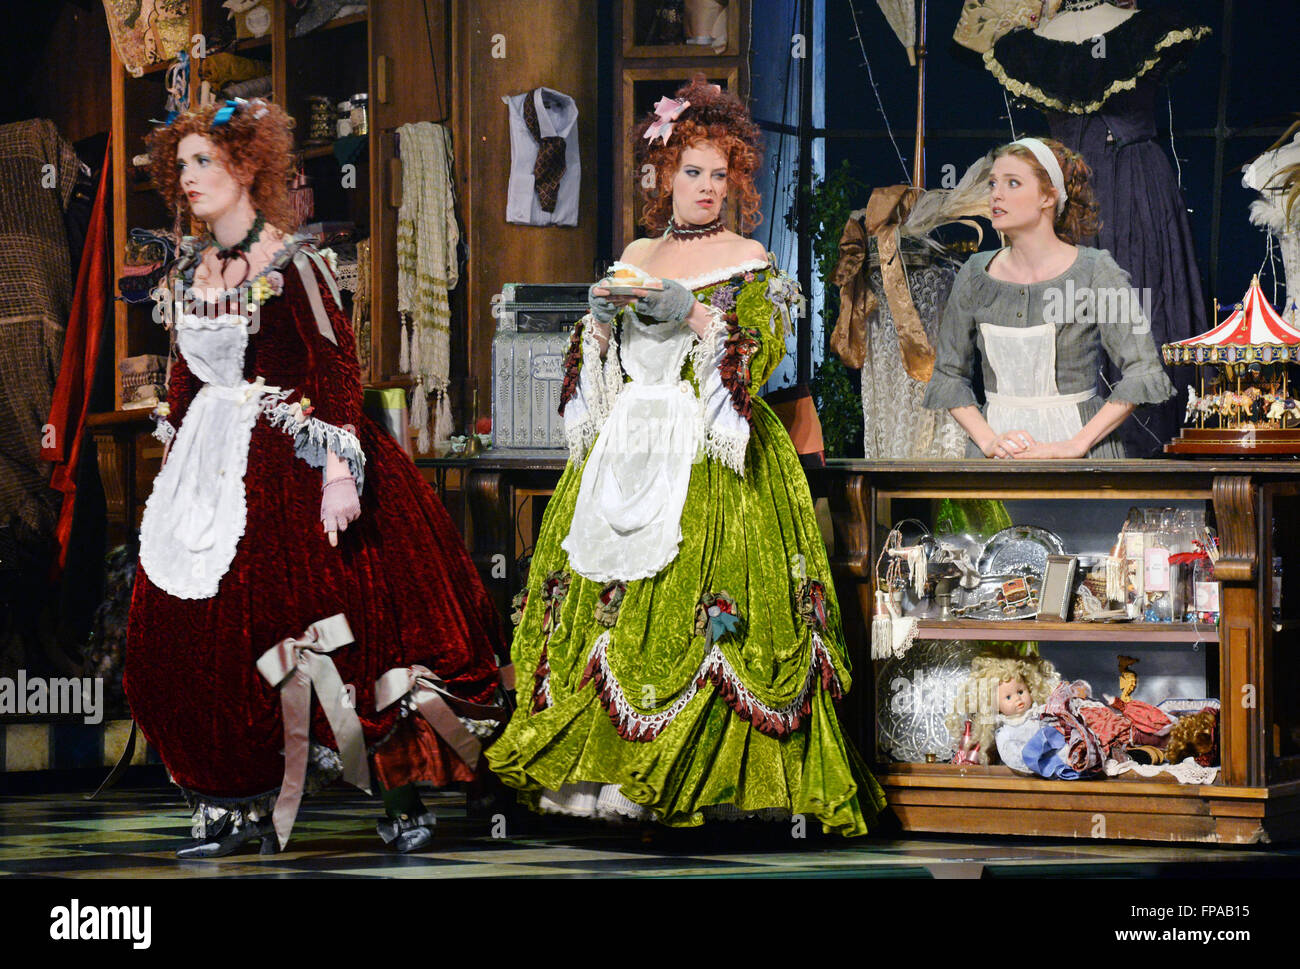 Rehearsal of the opera 'La Cenerentola' by Gioacchino Rossini at the opera in Leipzig, Germany, 17 March 2016. The production of Australian Lindy Hume is a co-production with the Opera Queensland and the New Zealand Opera and premieres on 19 March 2016. PHOTO: WALTRAUD GRUBITZSCH/dpa Stock Photo